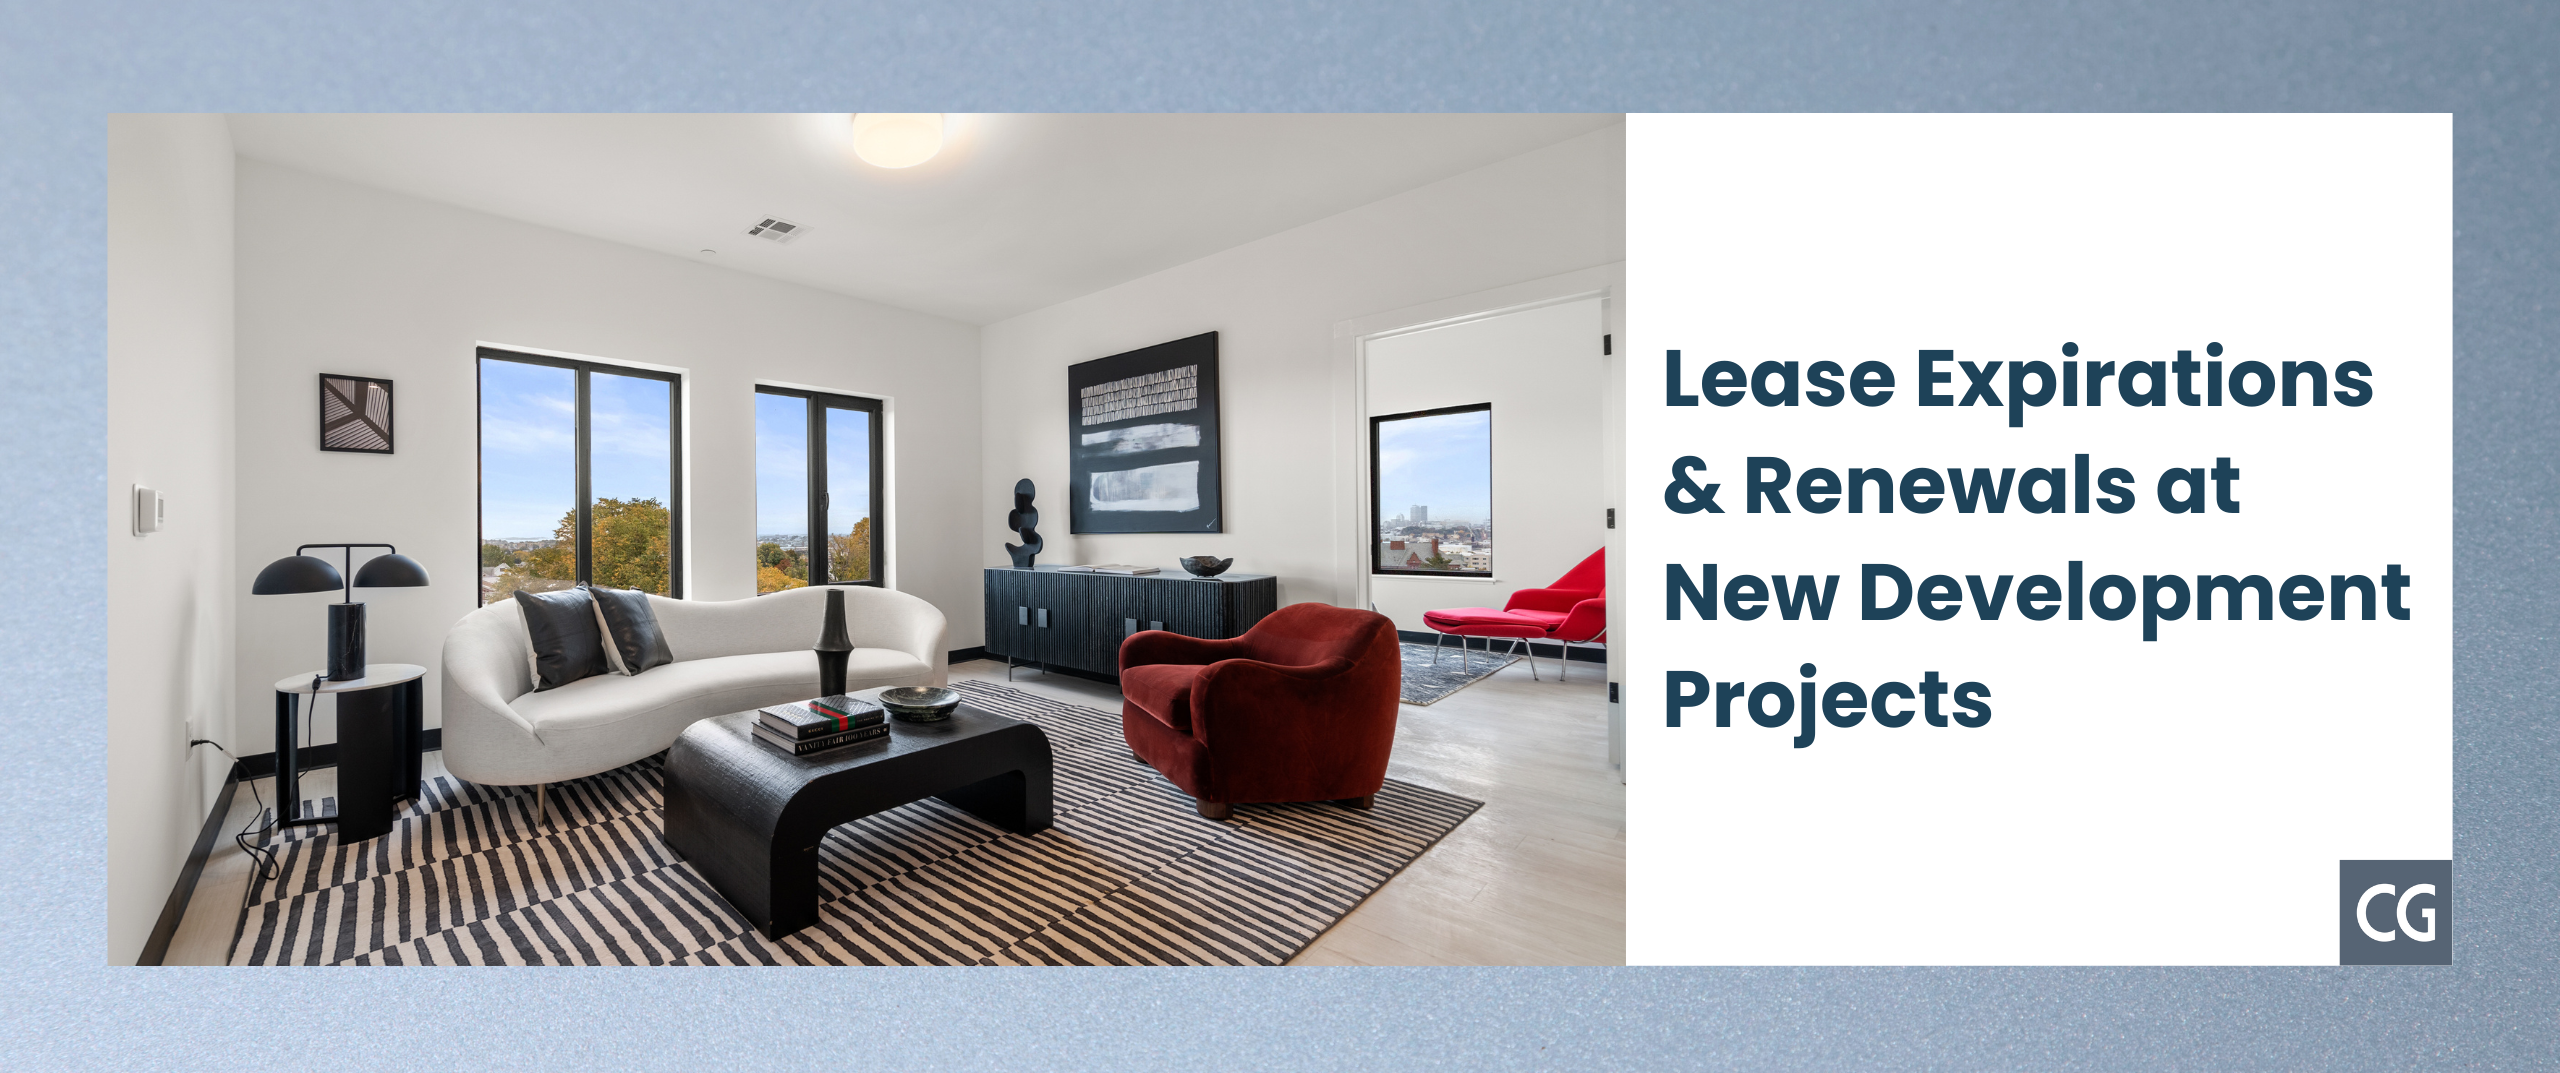 Planning for Lease Expirations & Renewals at New Developments